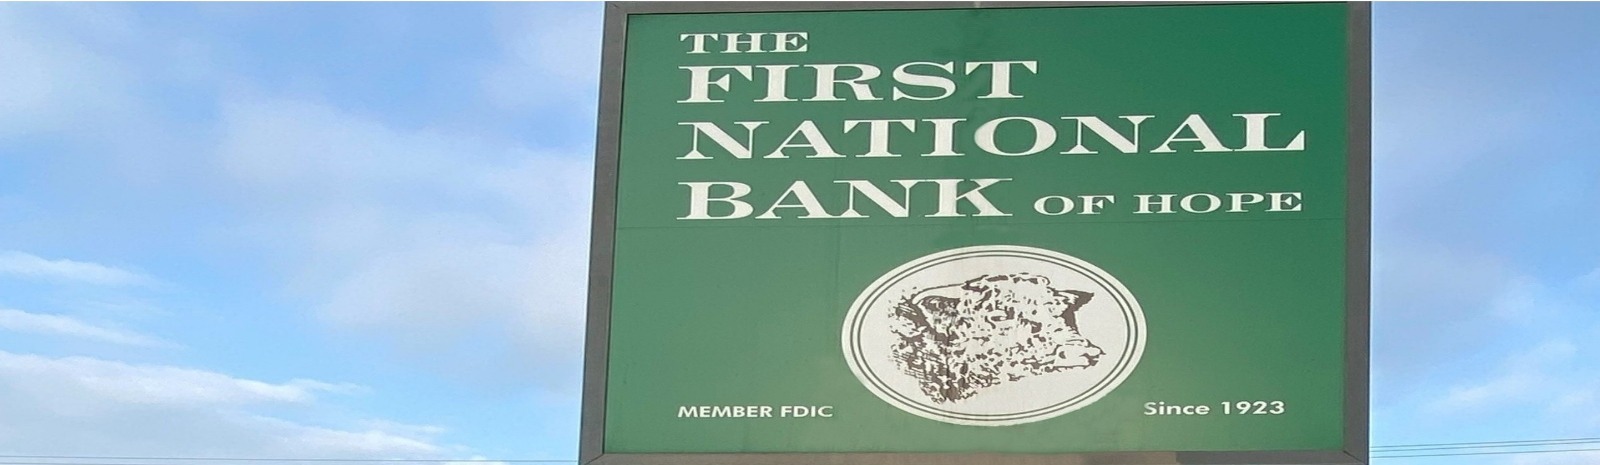 The First National Bank of Hope sign